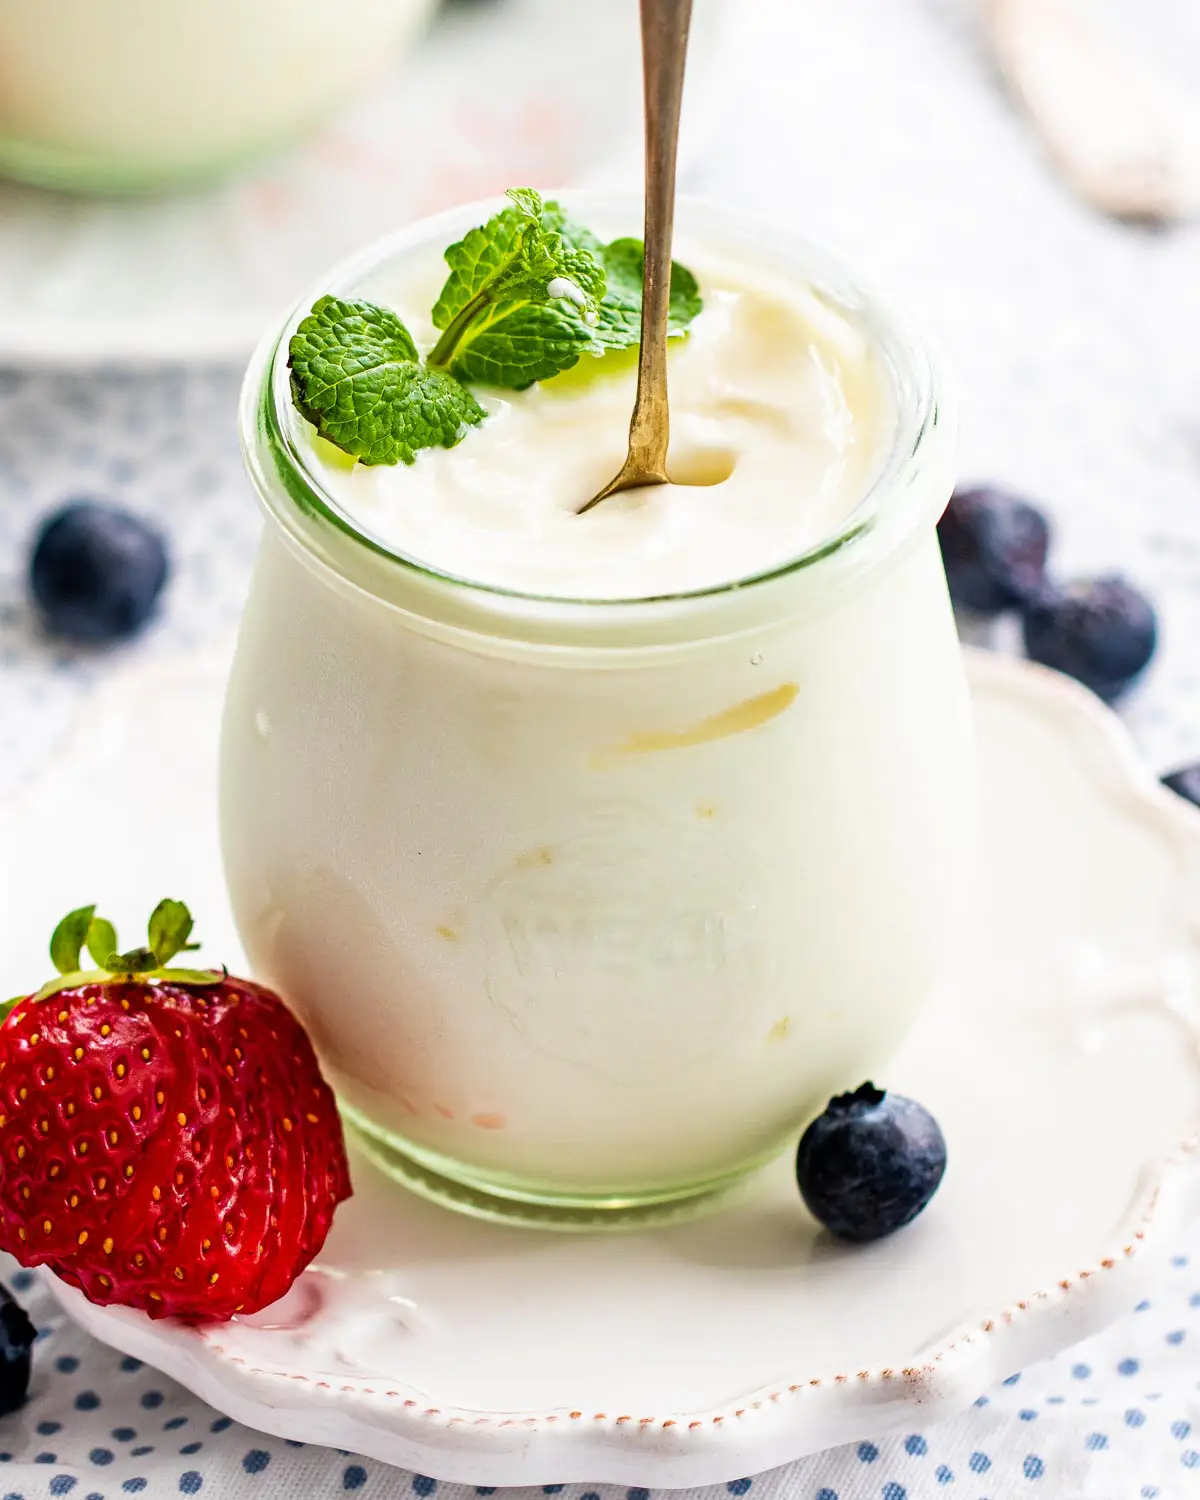 yogurt in a serving jar with a spoon standing garnished with mint and berries.